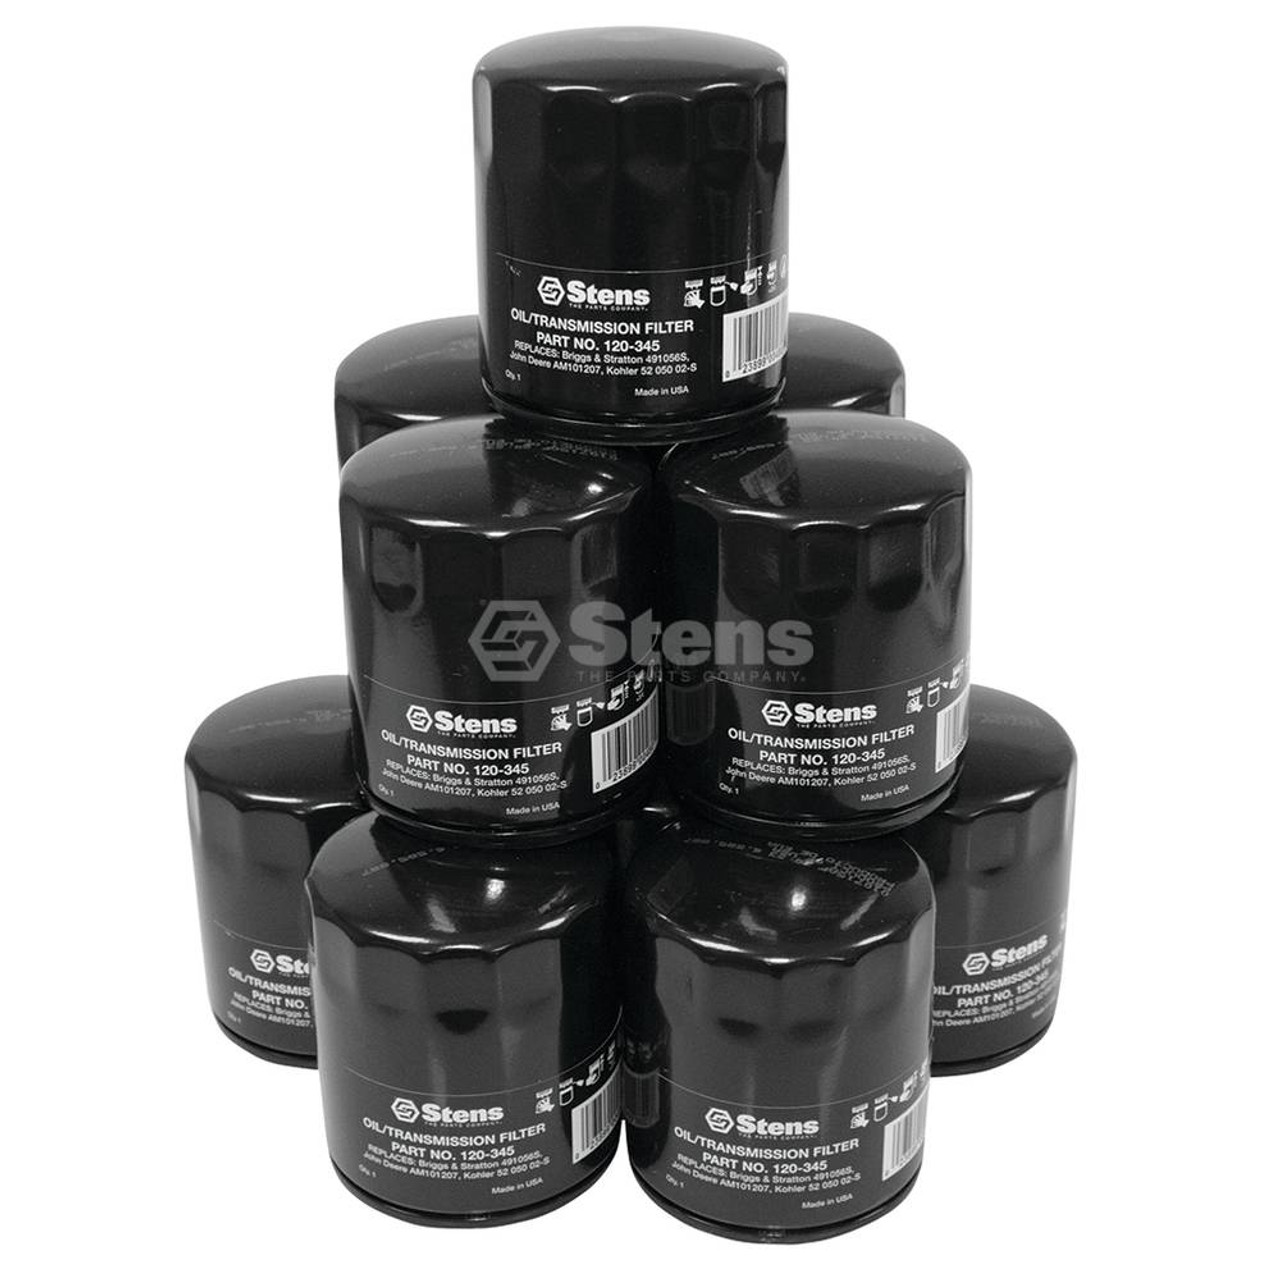 Oil Filters for John Deere STX46, 14, 70 Skid Steer, AM101207, HE122033P, TCA10018, HE 122-033P, Oil Filter Shop Pack of 12 Anti Drain, Made In USA